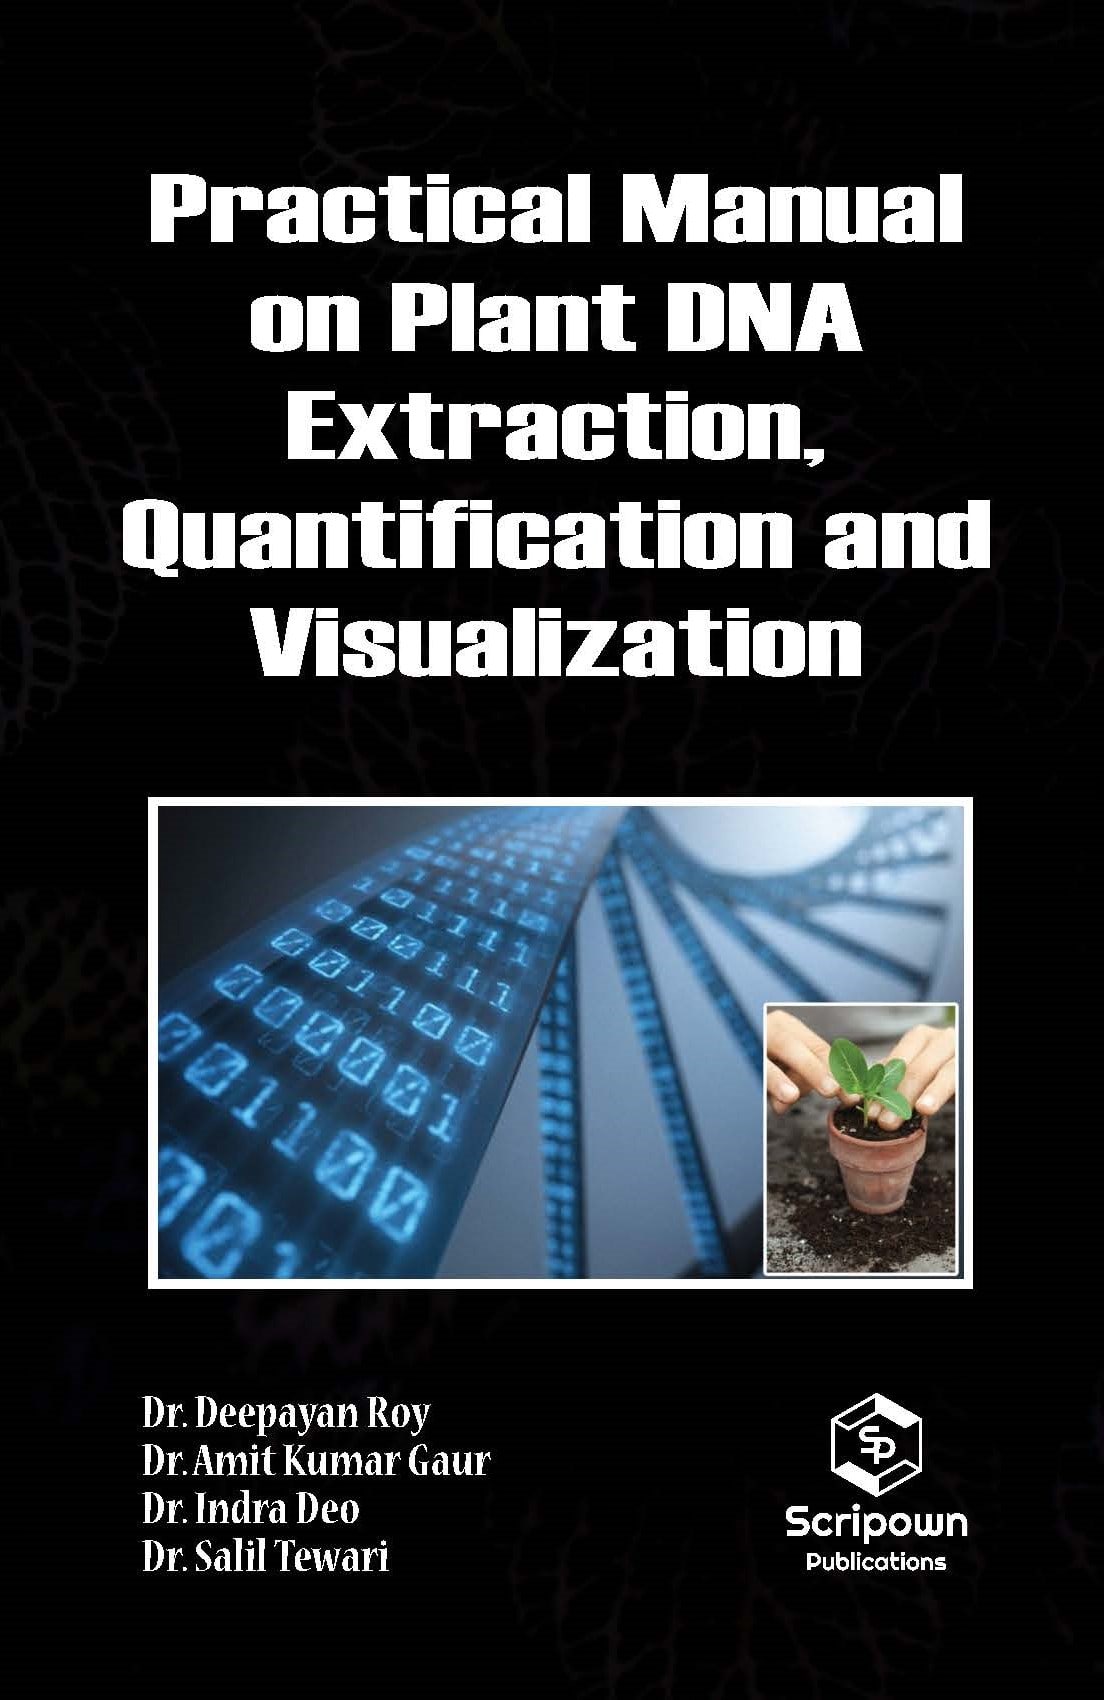 Practical Manual on Plant DNA Extraction, Quantification and Visualization